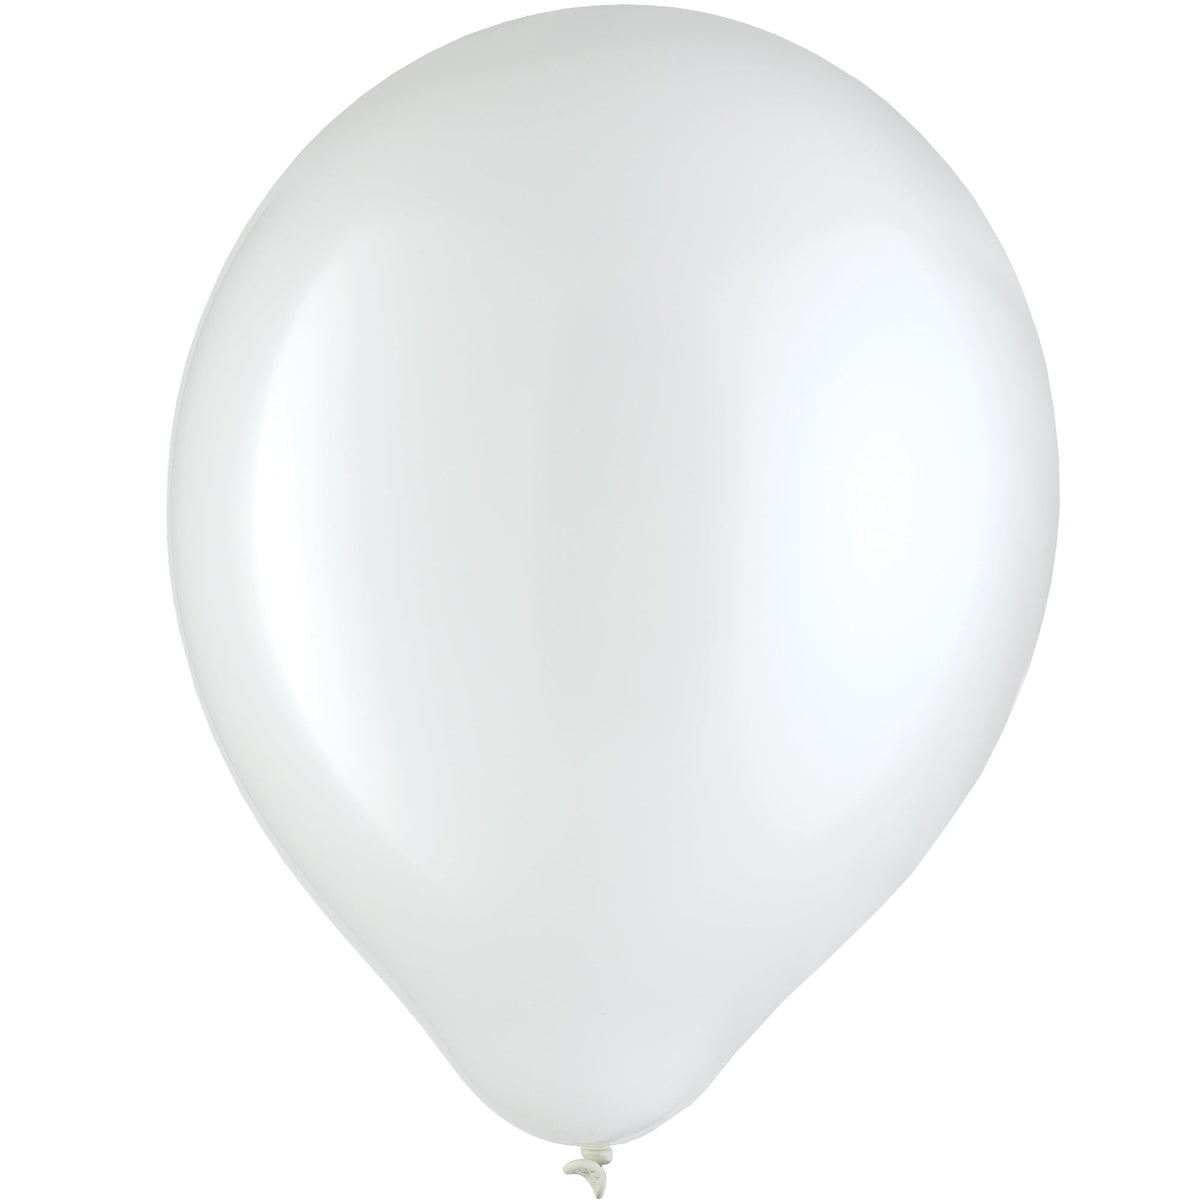 White Solid Color 12" helium quality 15 count Latex Balloons